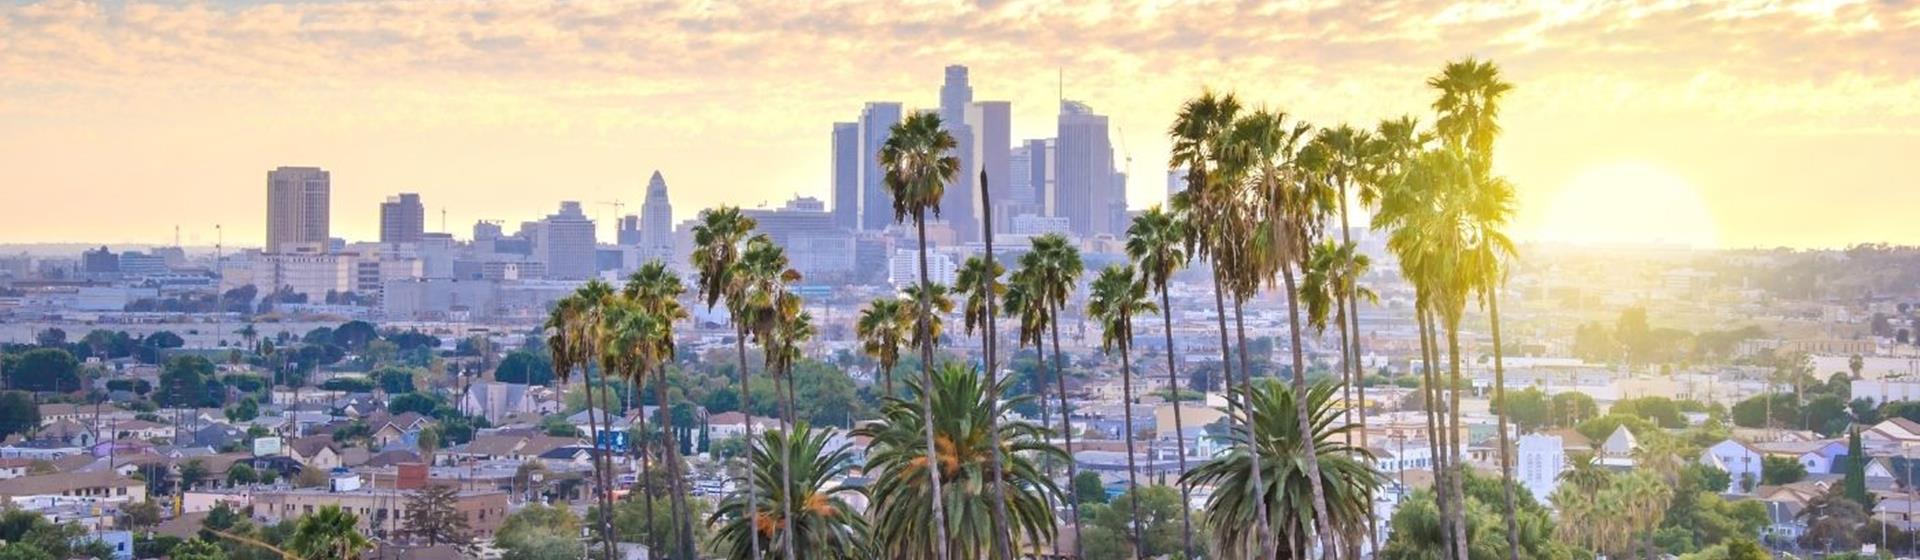 Holidays & City Breaks to Los Angeles